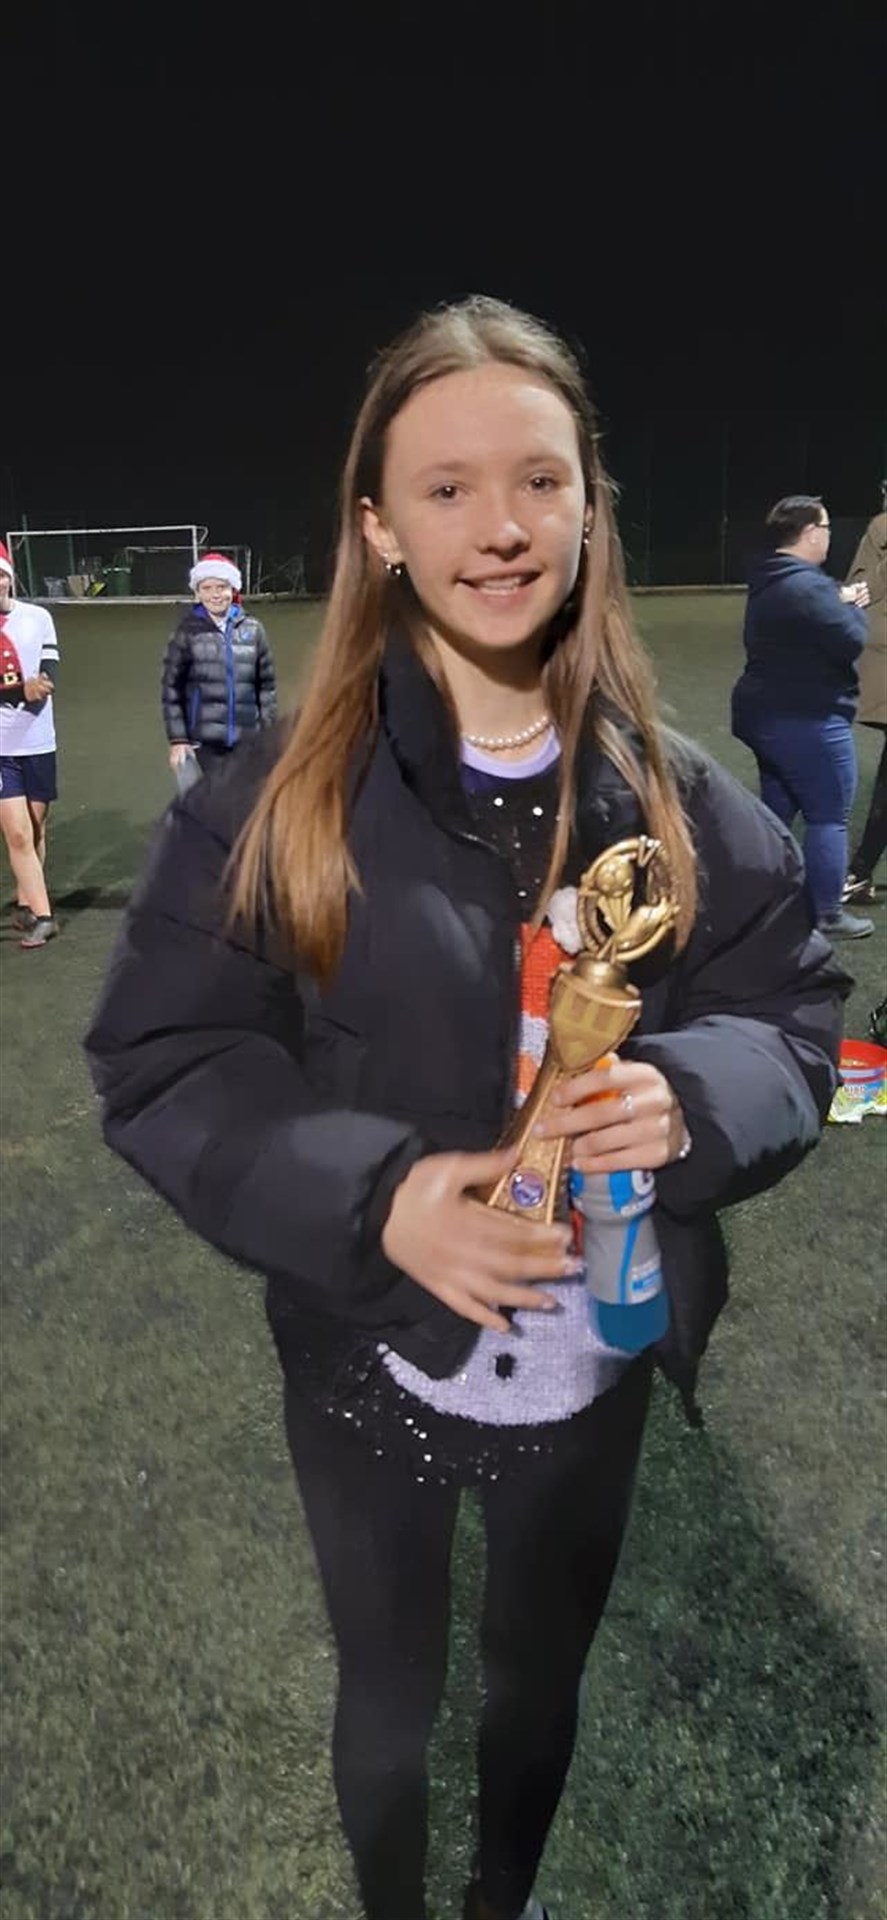 Ross County Girls' under-13 most improved player was Leona Afrin.